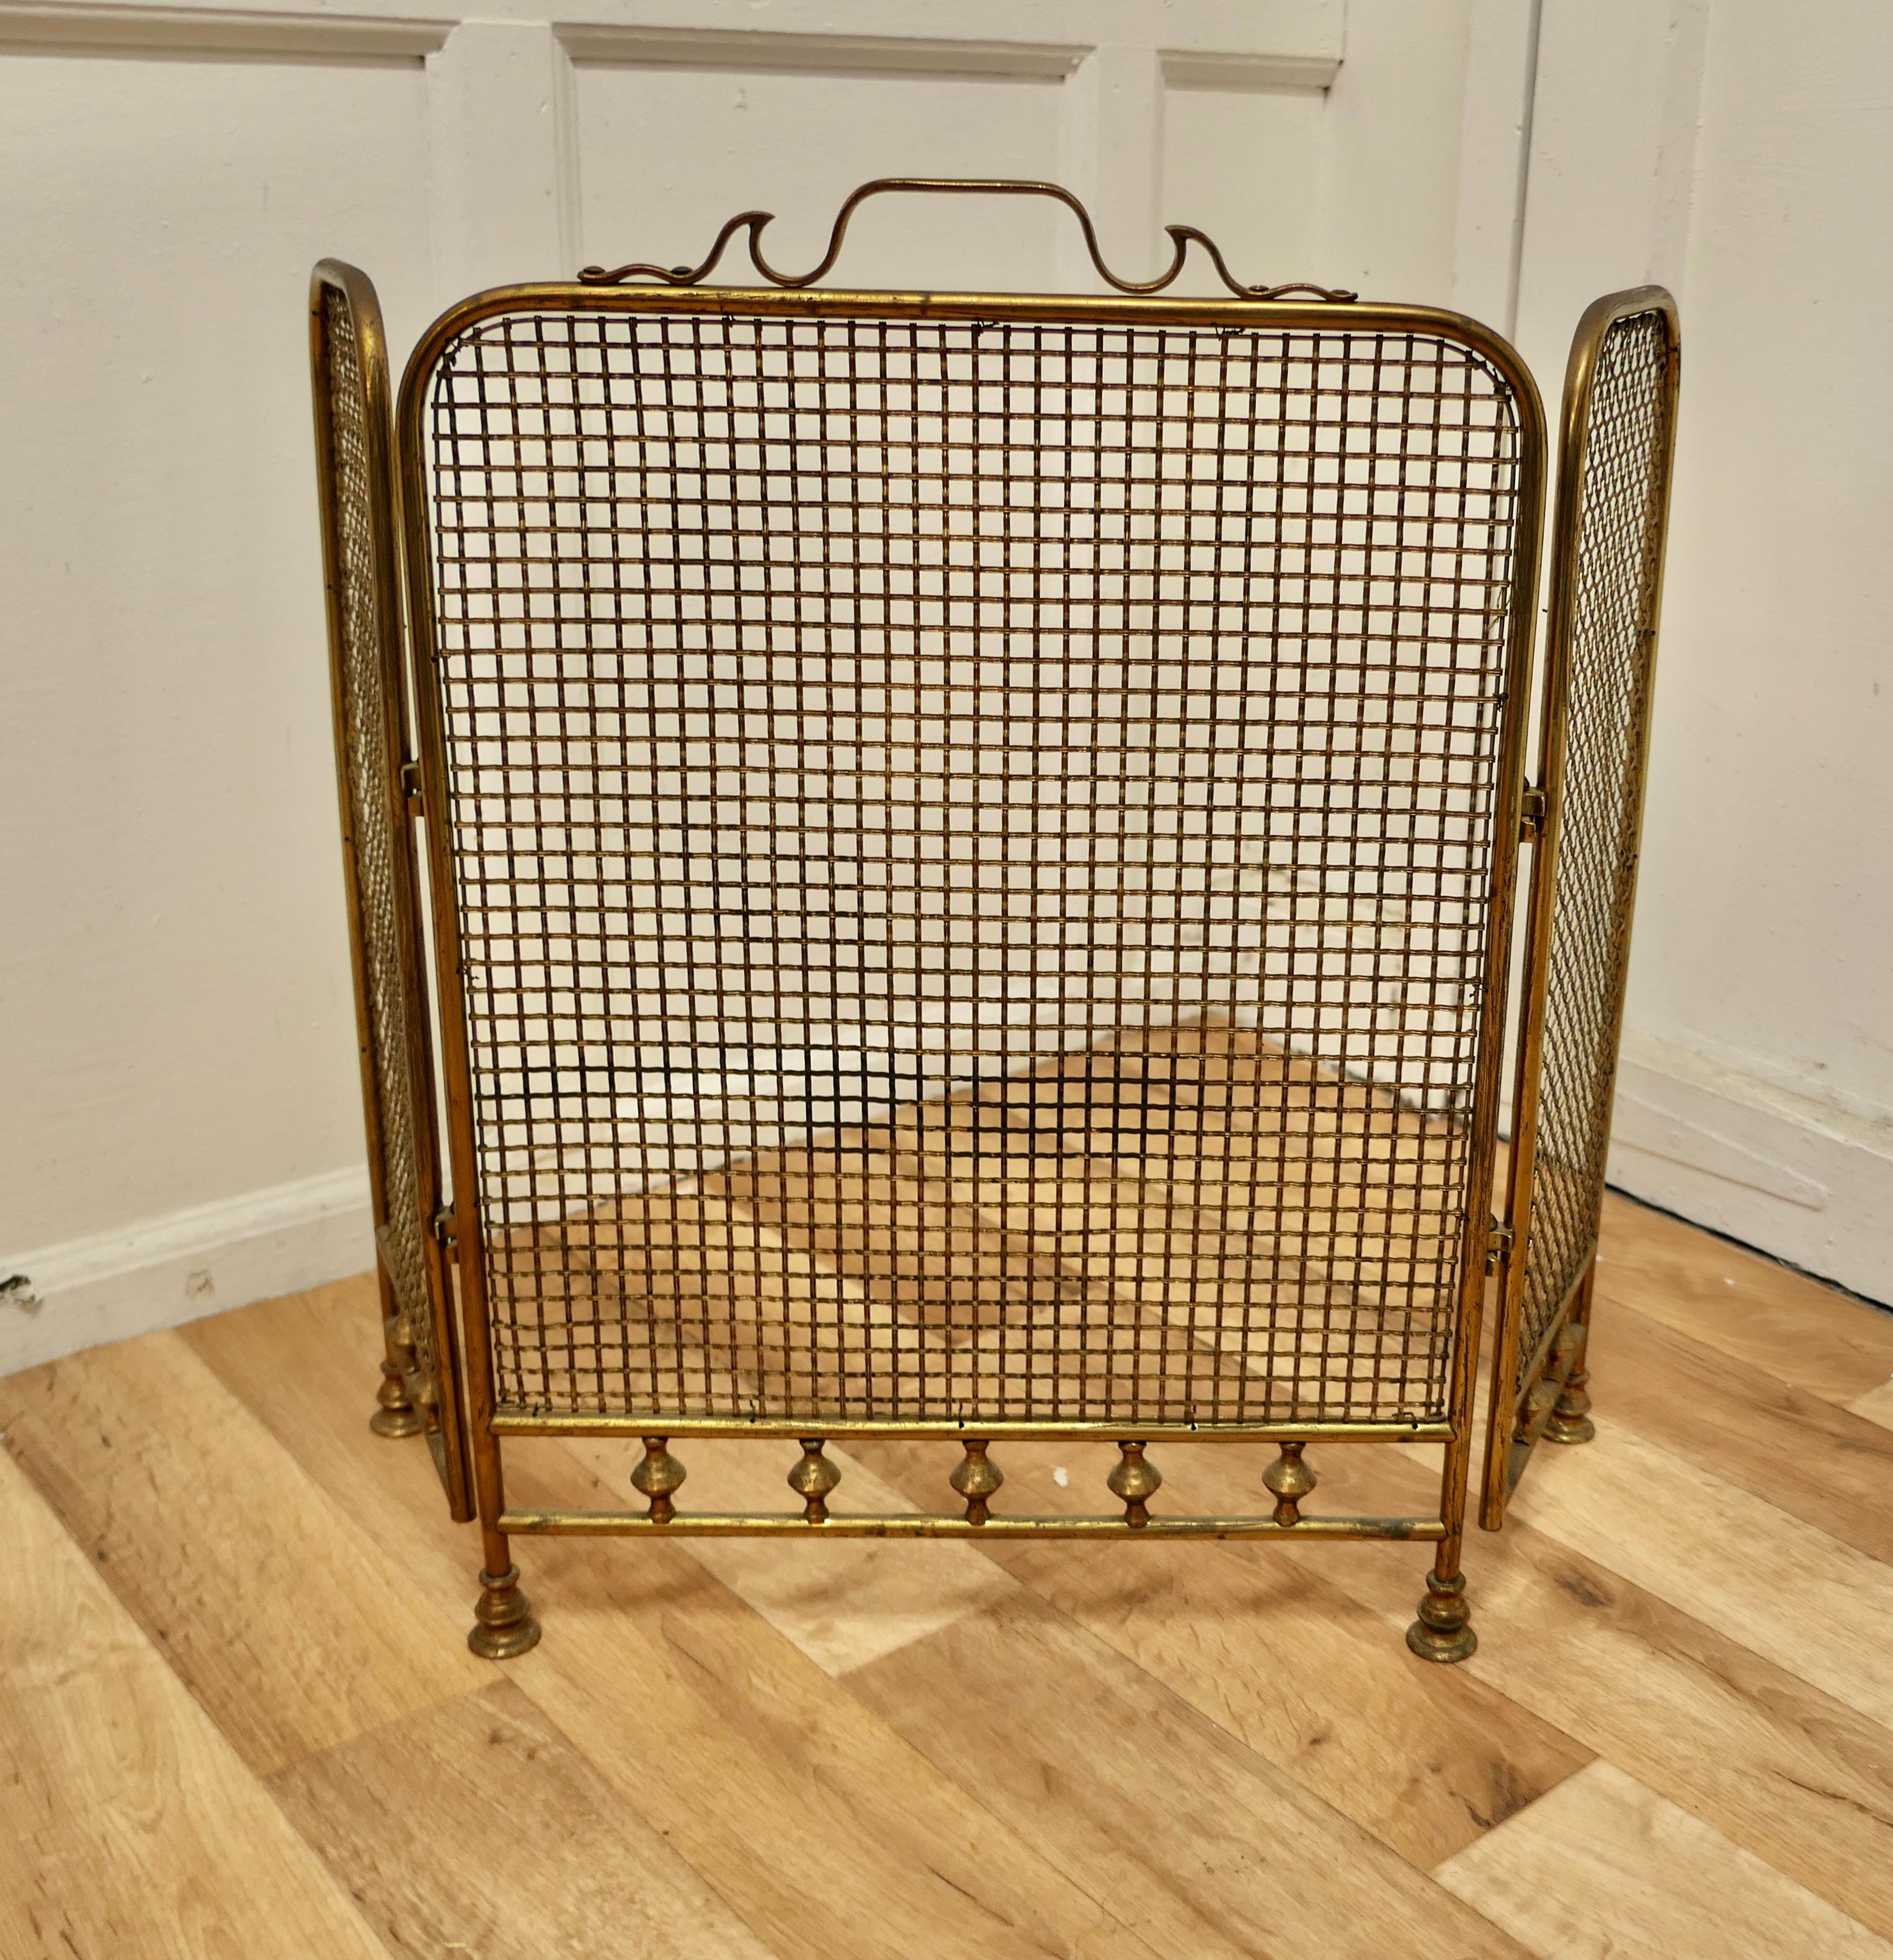 19th Century folding brass fire guard.

This very useful and decorative Fire Guard has a brass frame even the mesh infill is made with brass, it has the added advantage that it folds flat for storage, and when opened out it can be shaped to